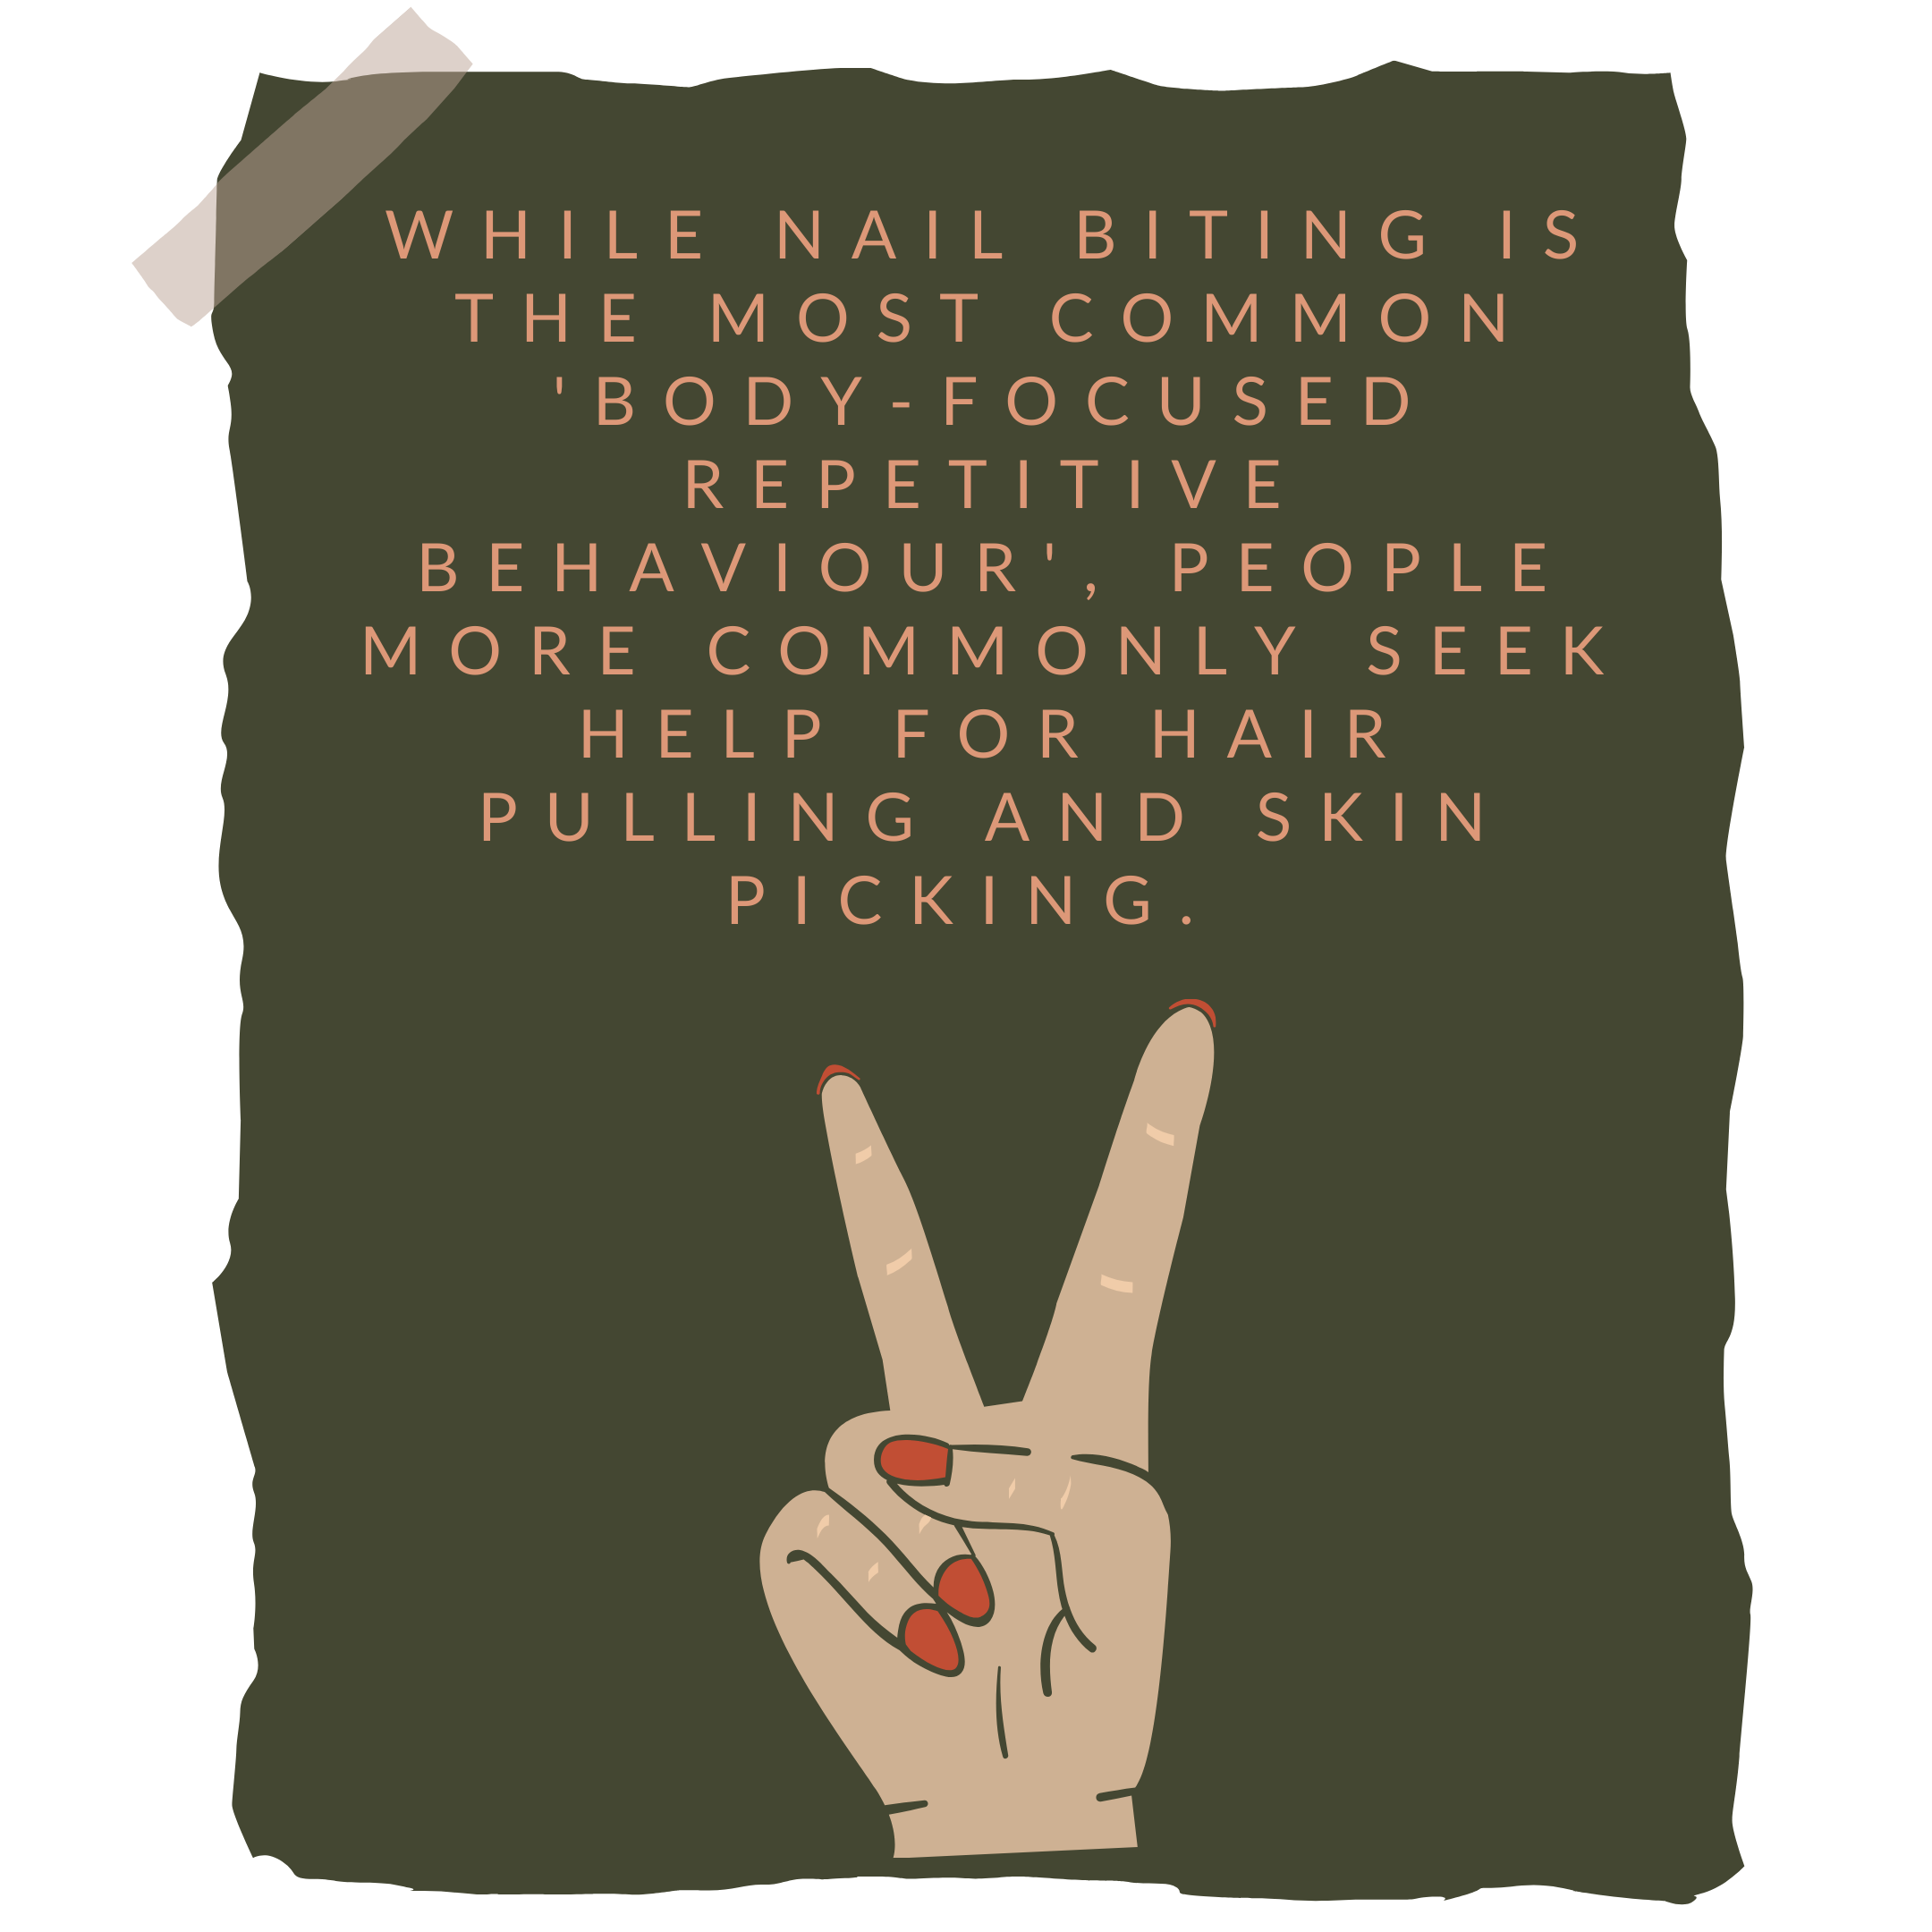 OCD and Nail Biting: Is There a Connection? - Impulse